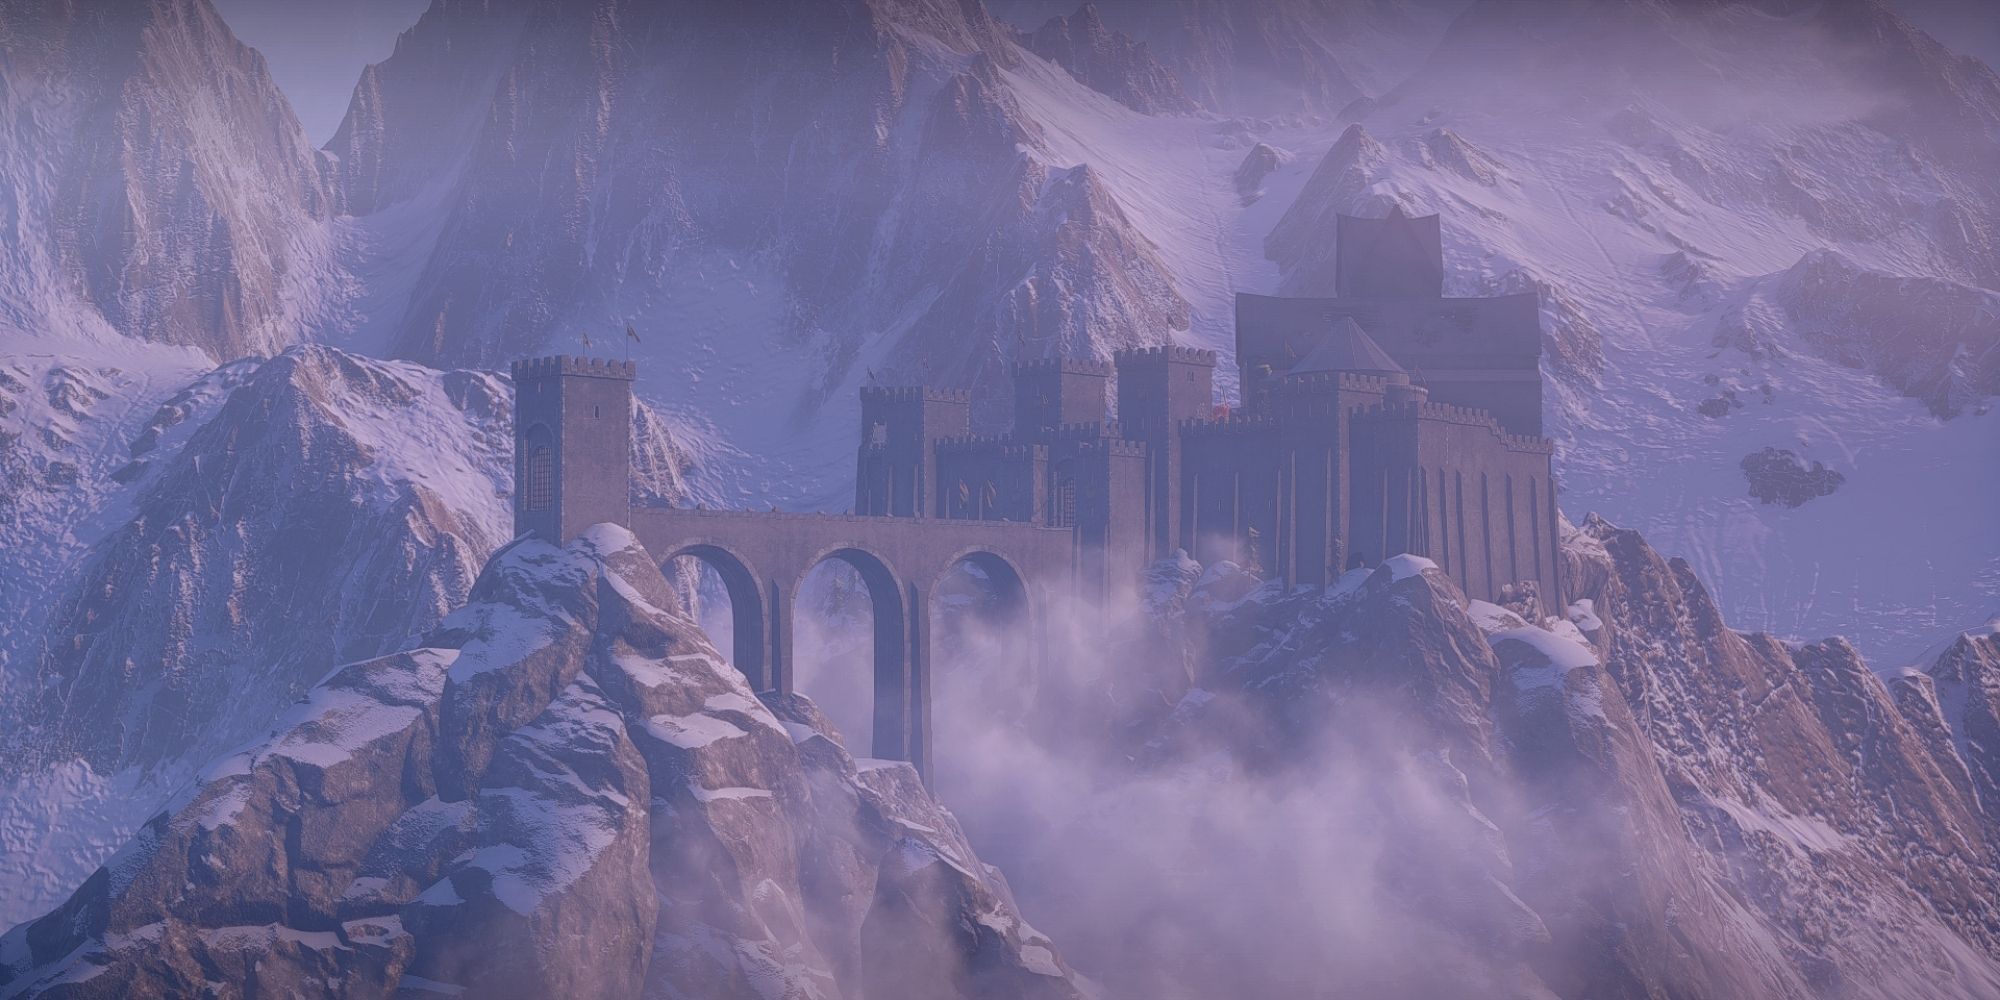 Dragon Age Inquisition - Skyhold as viewed from afar